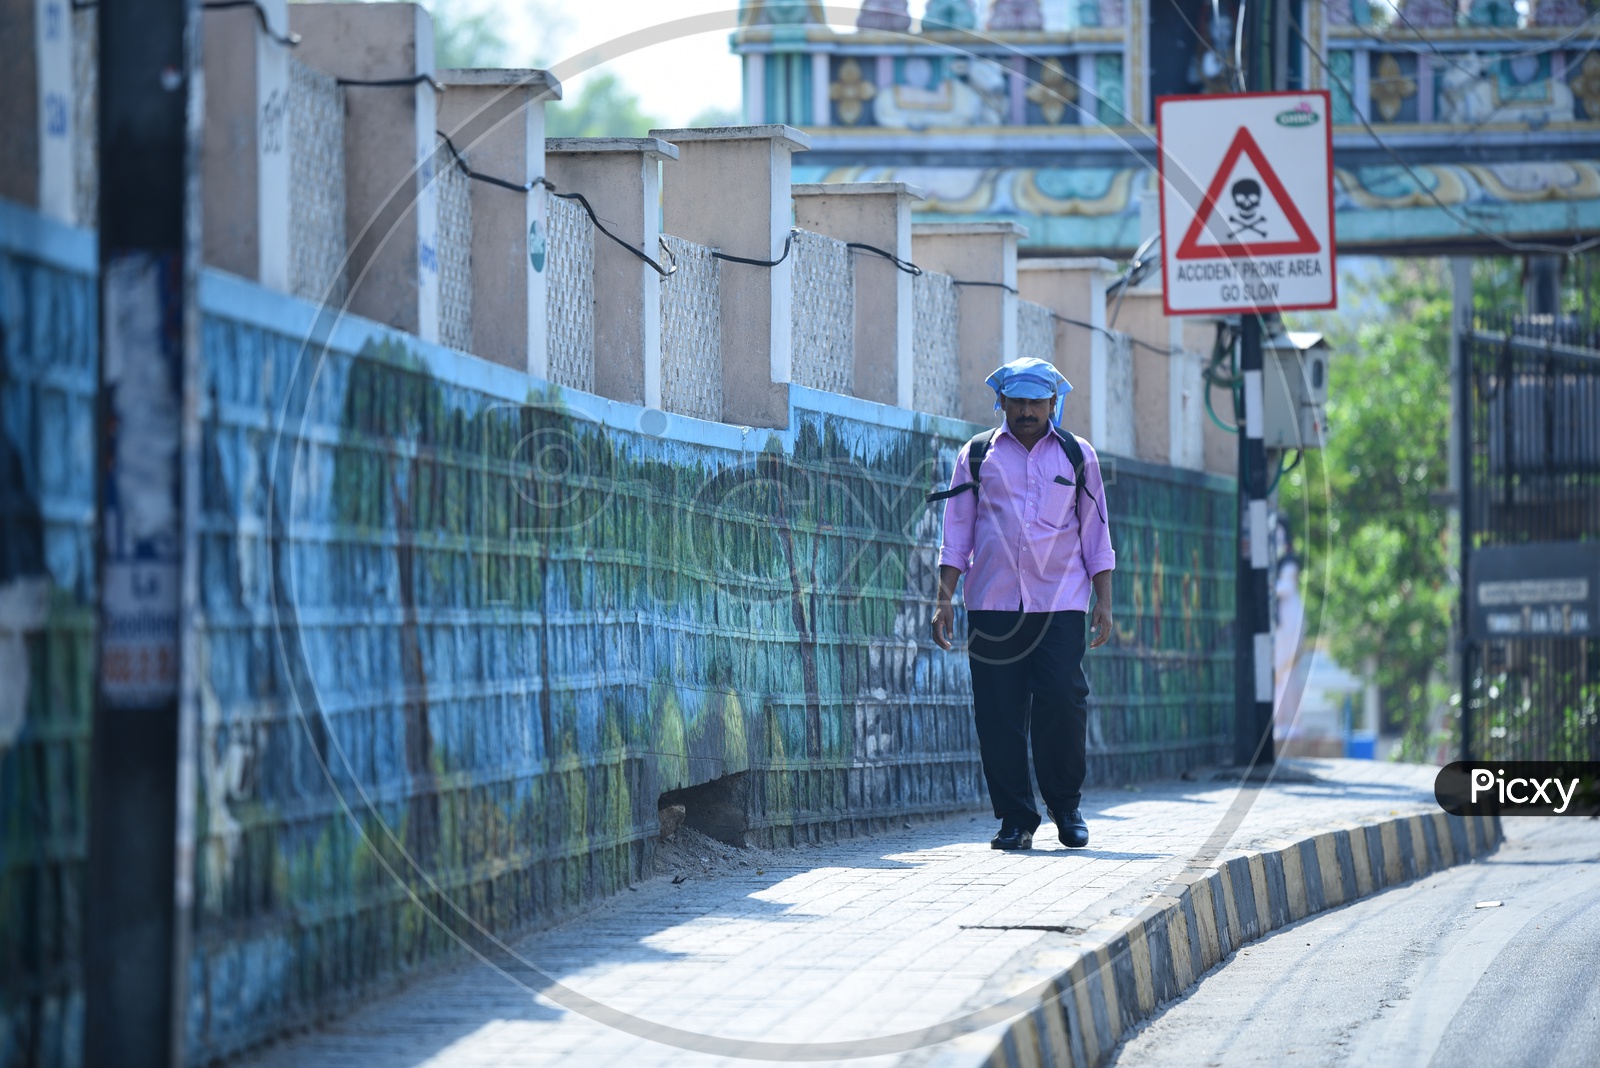 A Office Going Man Or Pedestrian Walking On  a Footpath in a Sunny day With Kerchief Covering His Head